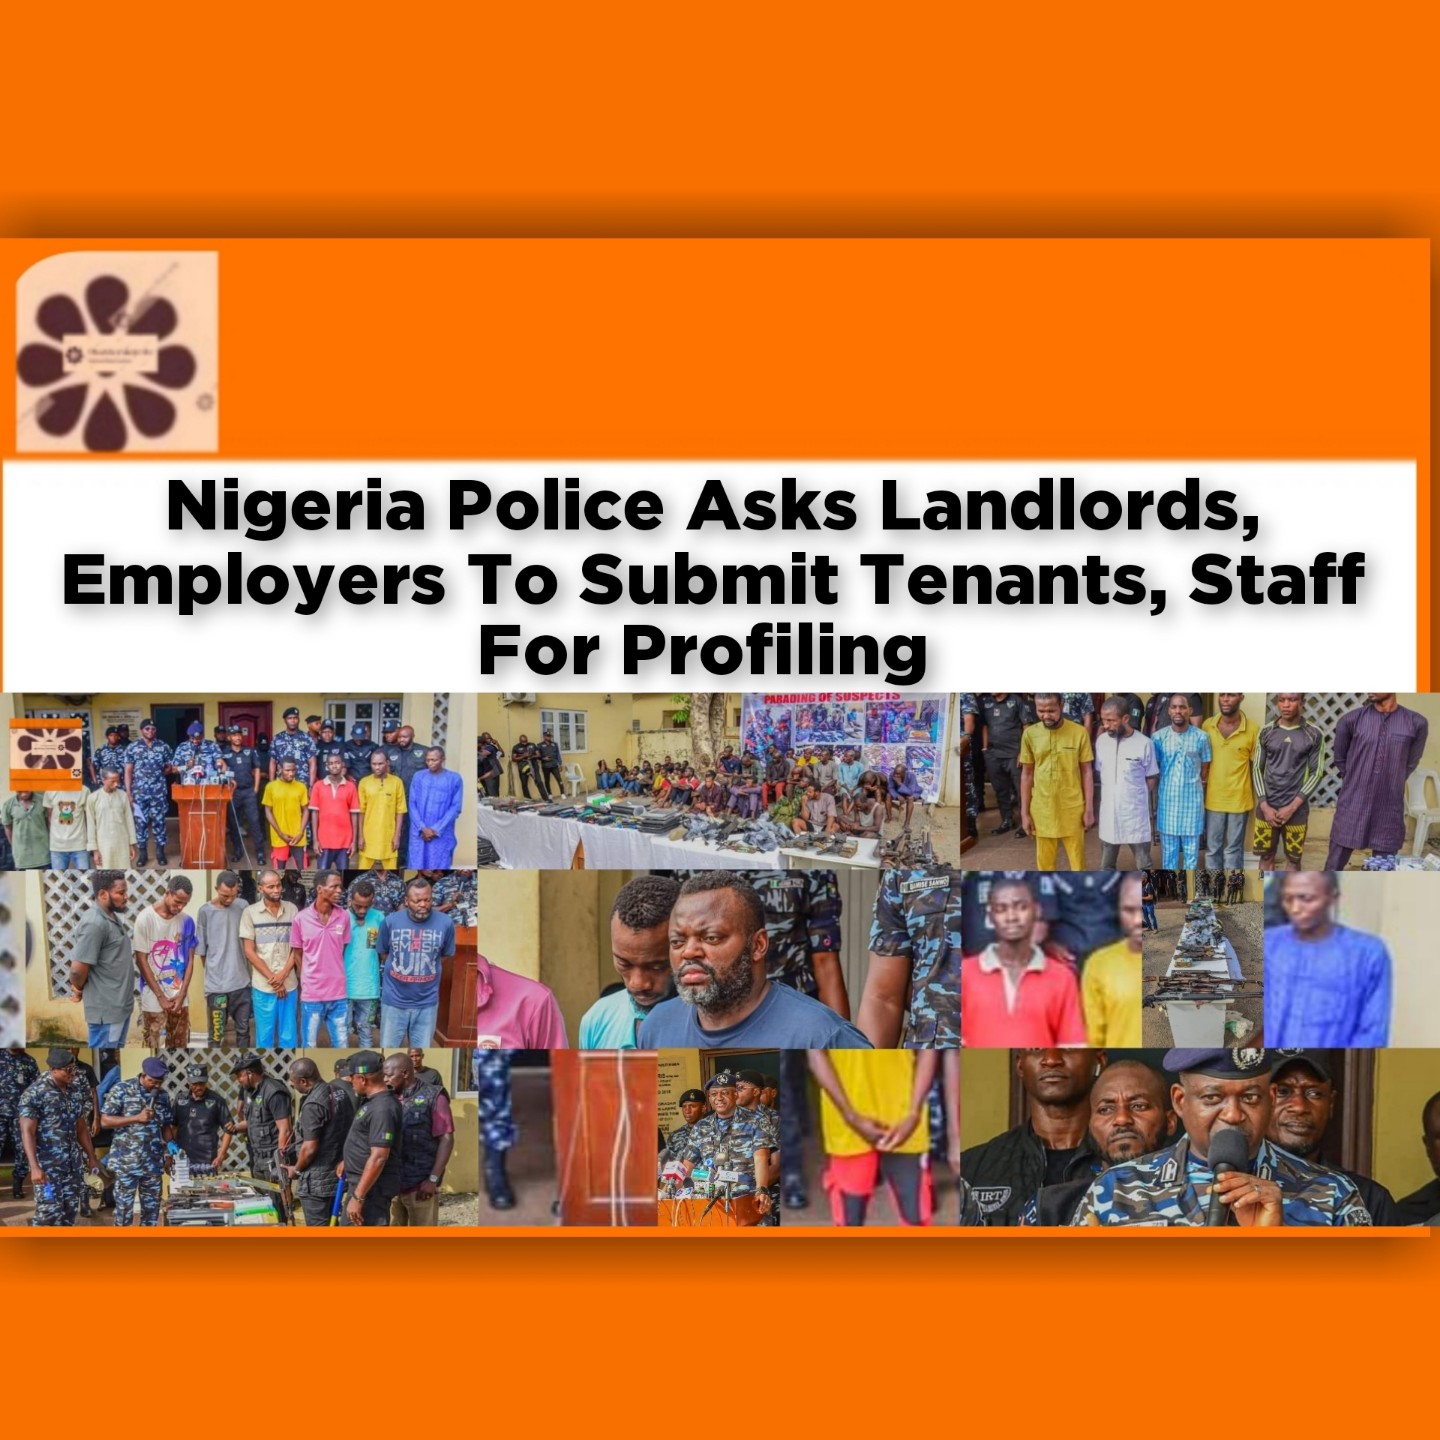 Nigeria Police Asks Landlords, Employers To Submit Tenants, Staff For Profiling ~ OsazuwaAkonedo #Shell